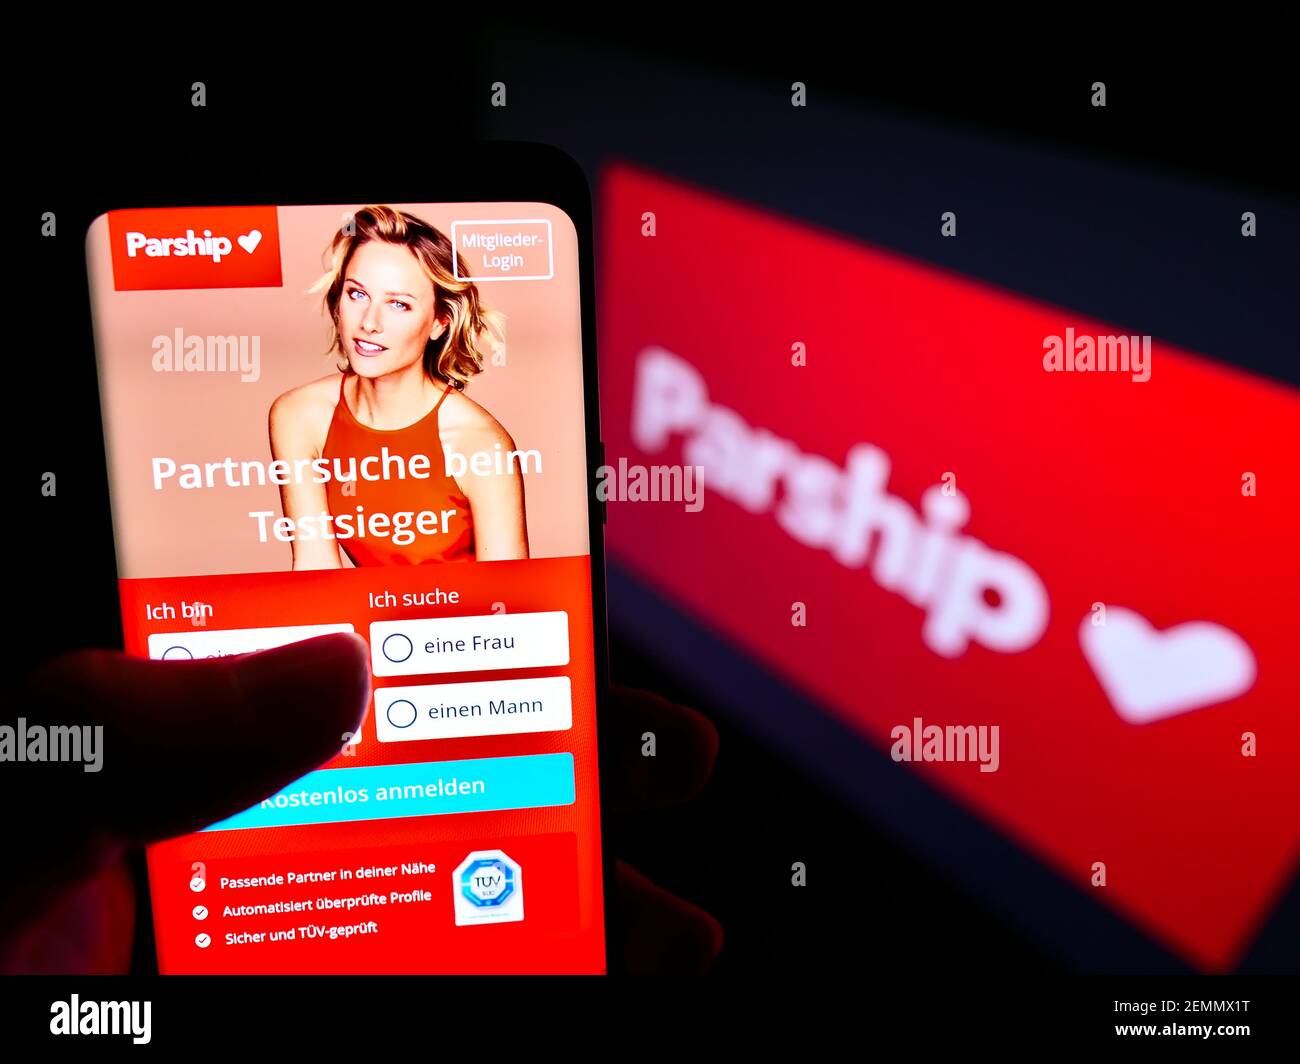 Person holding smartphone with website of German online dating platform Parship on screen in front of company logo. Focus on center of phone display. Stock Photo